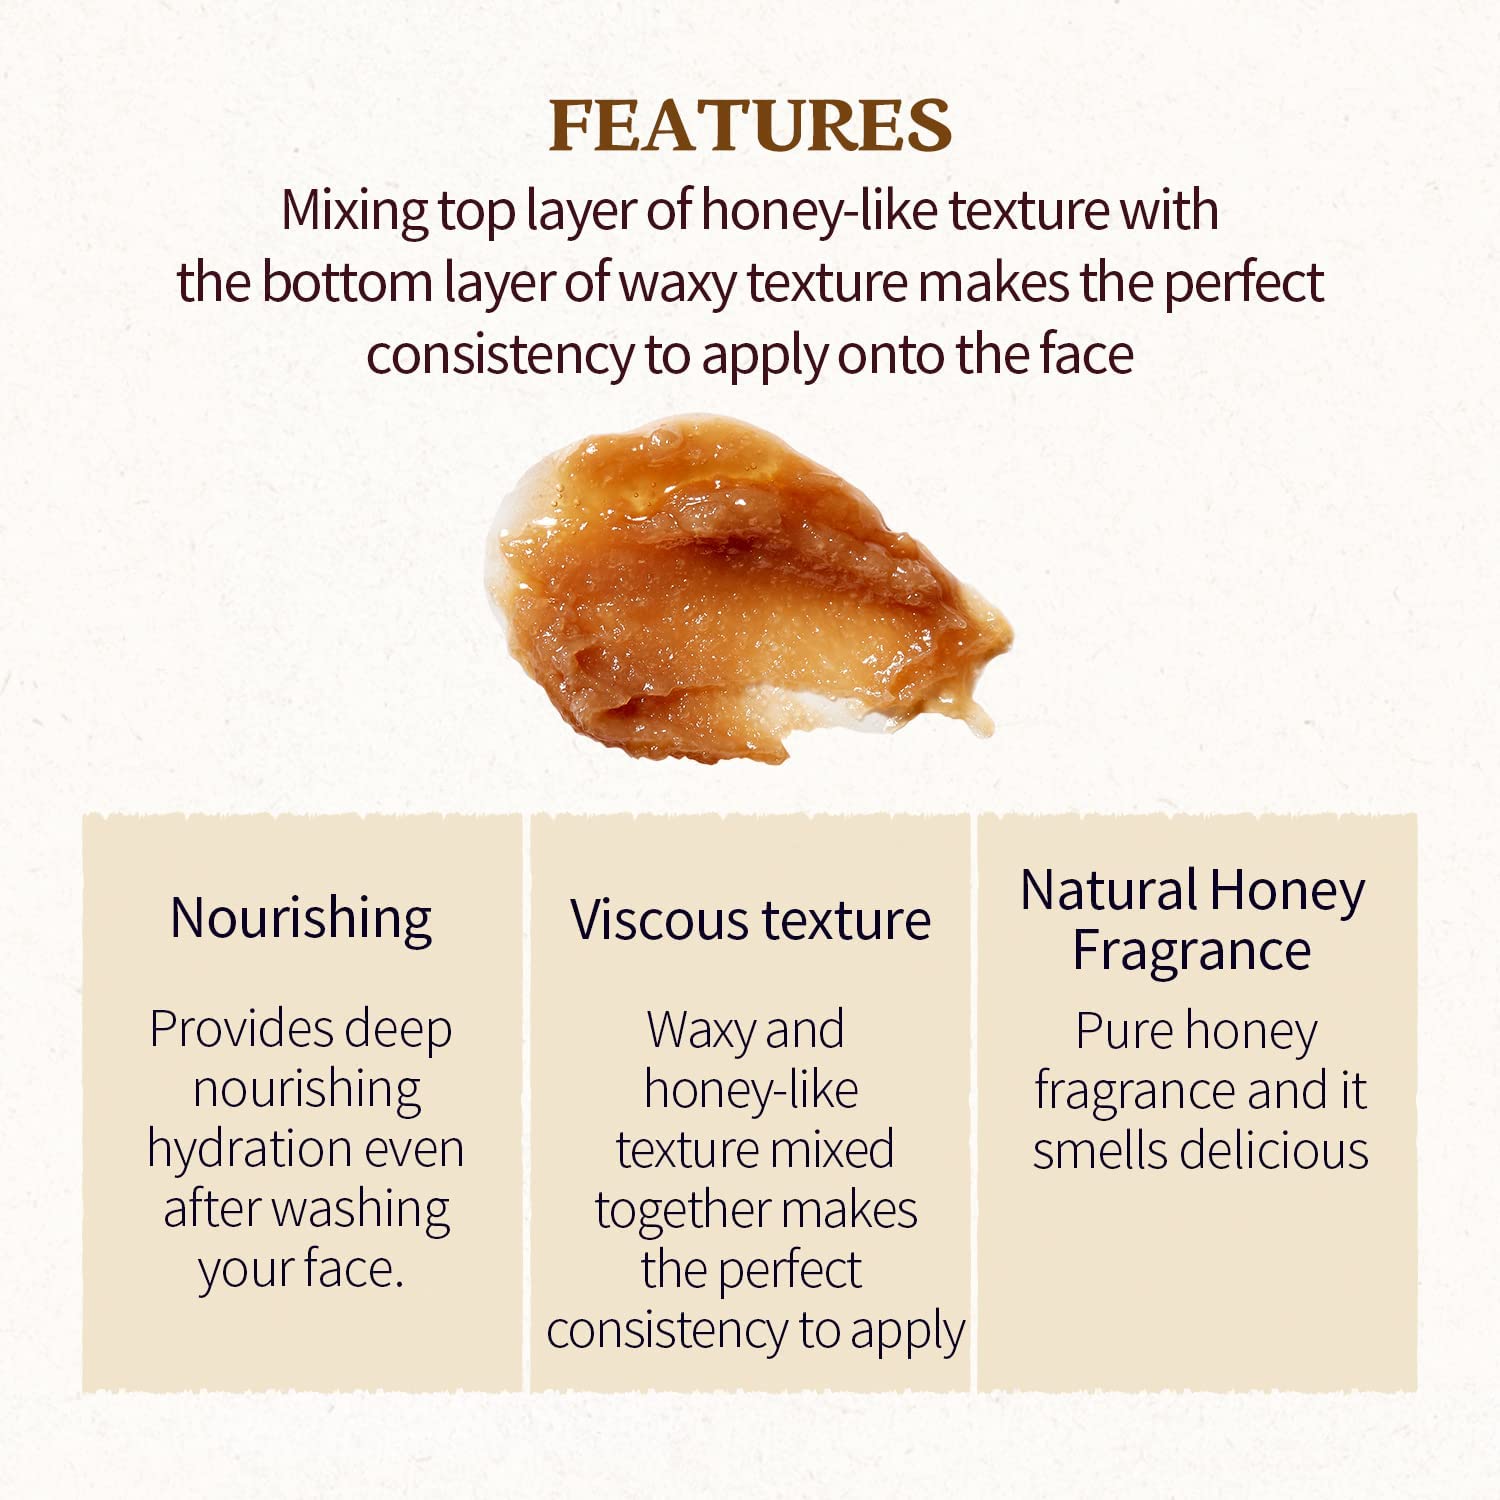 SKINFOOD Honey Sugar Mask is mixing top layer of honey-like texture with the bottom layer of waxy texture makes the perfect consistency to apply on the face. Provides deep hydration even after washing your face. Its natural pure honey fragrance smells delicious. 